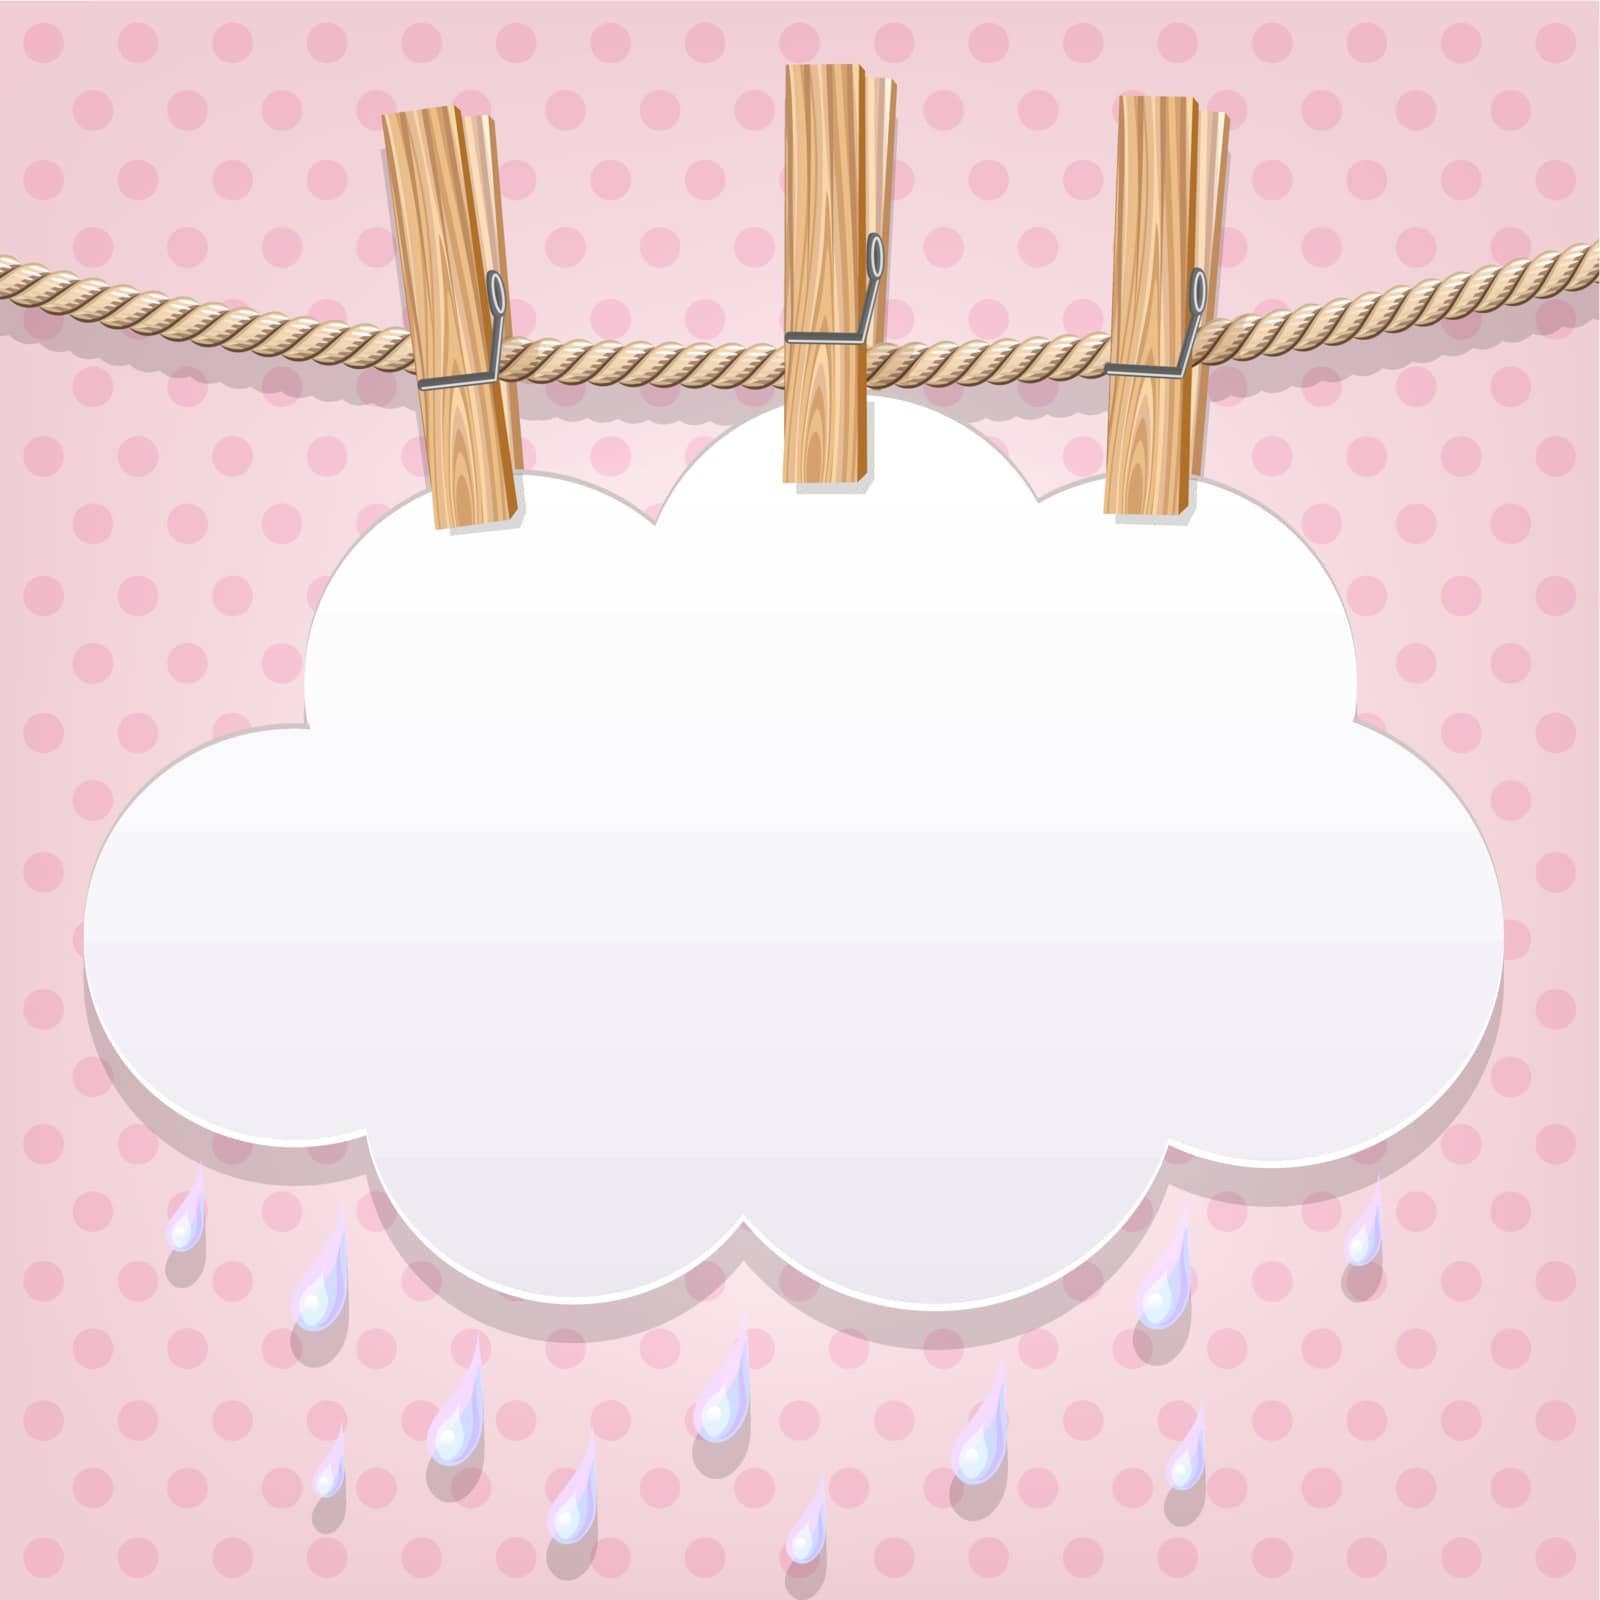 White paper cloud on a clothesline by Elenita